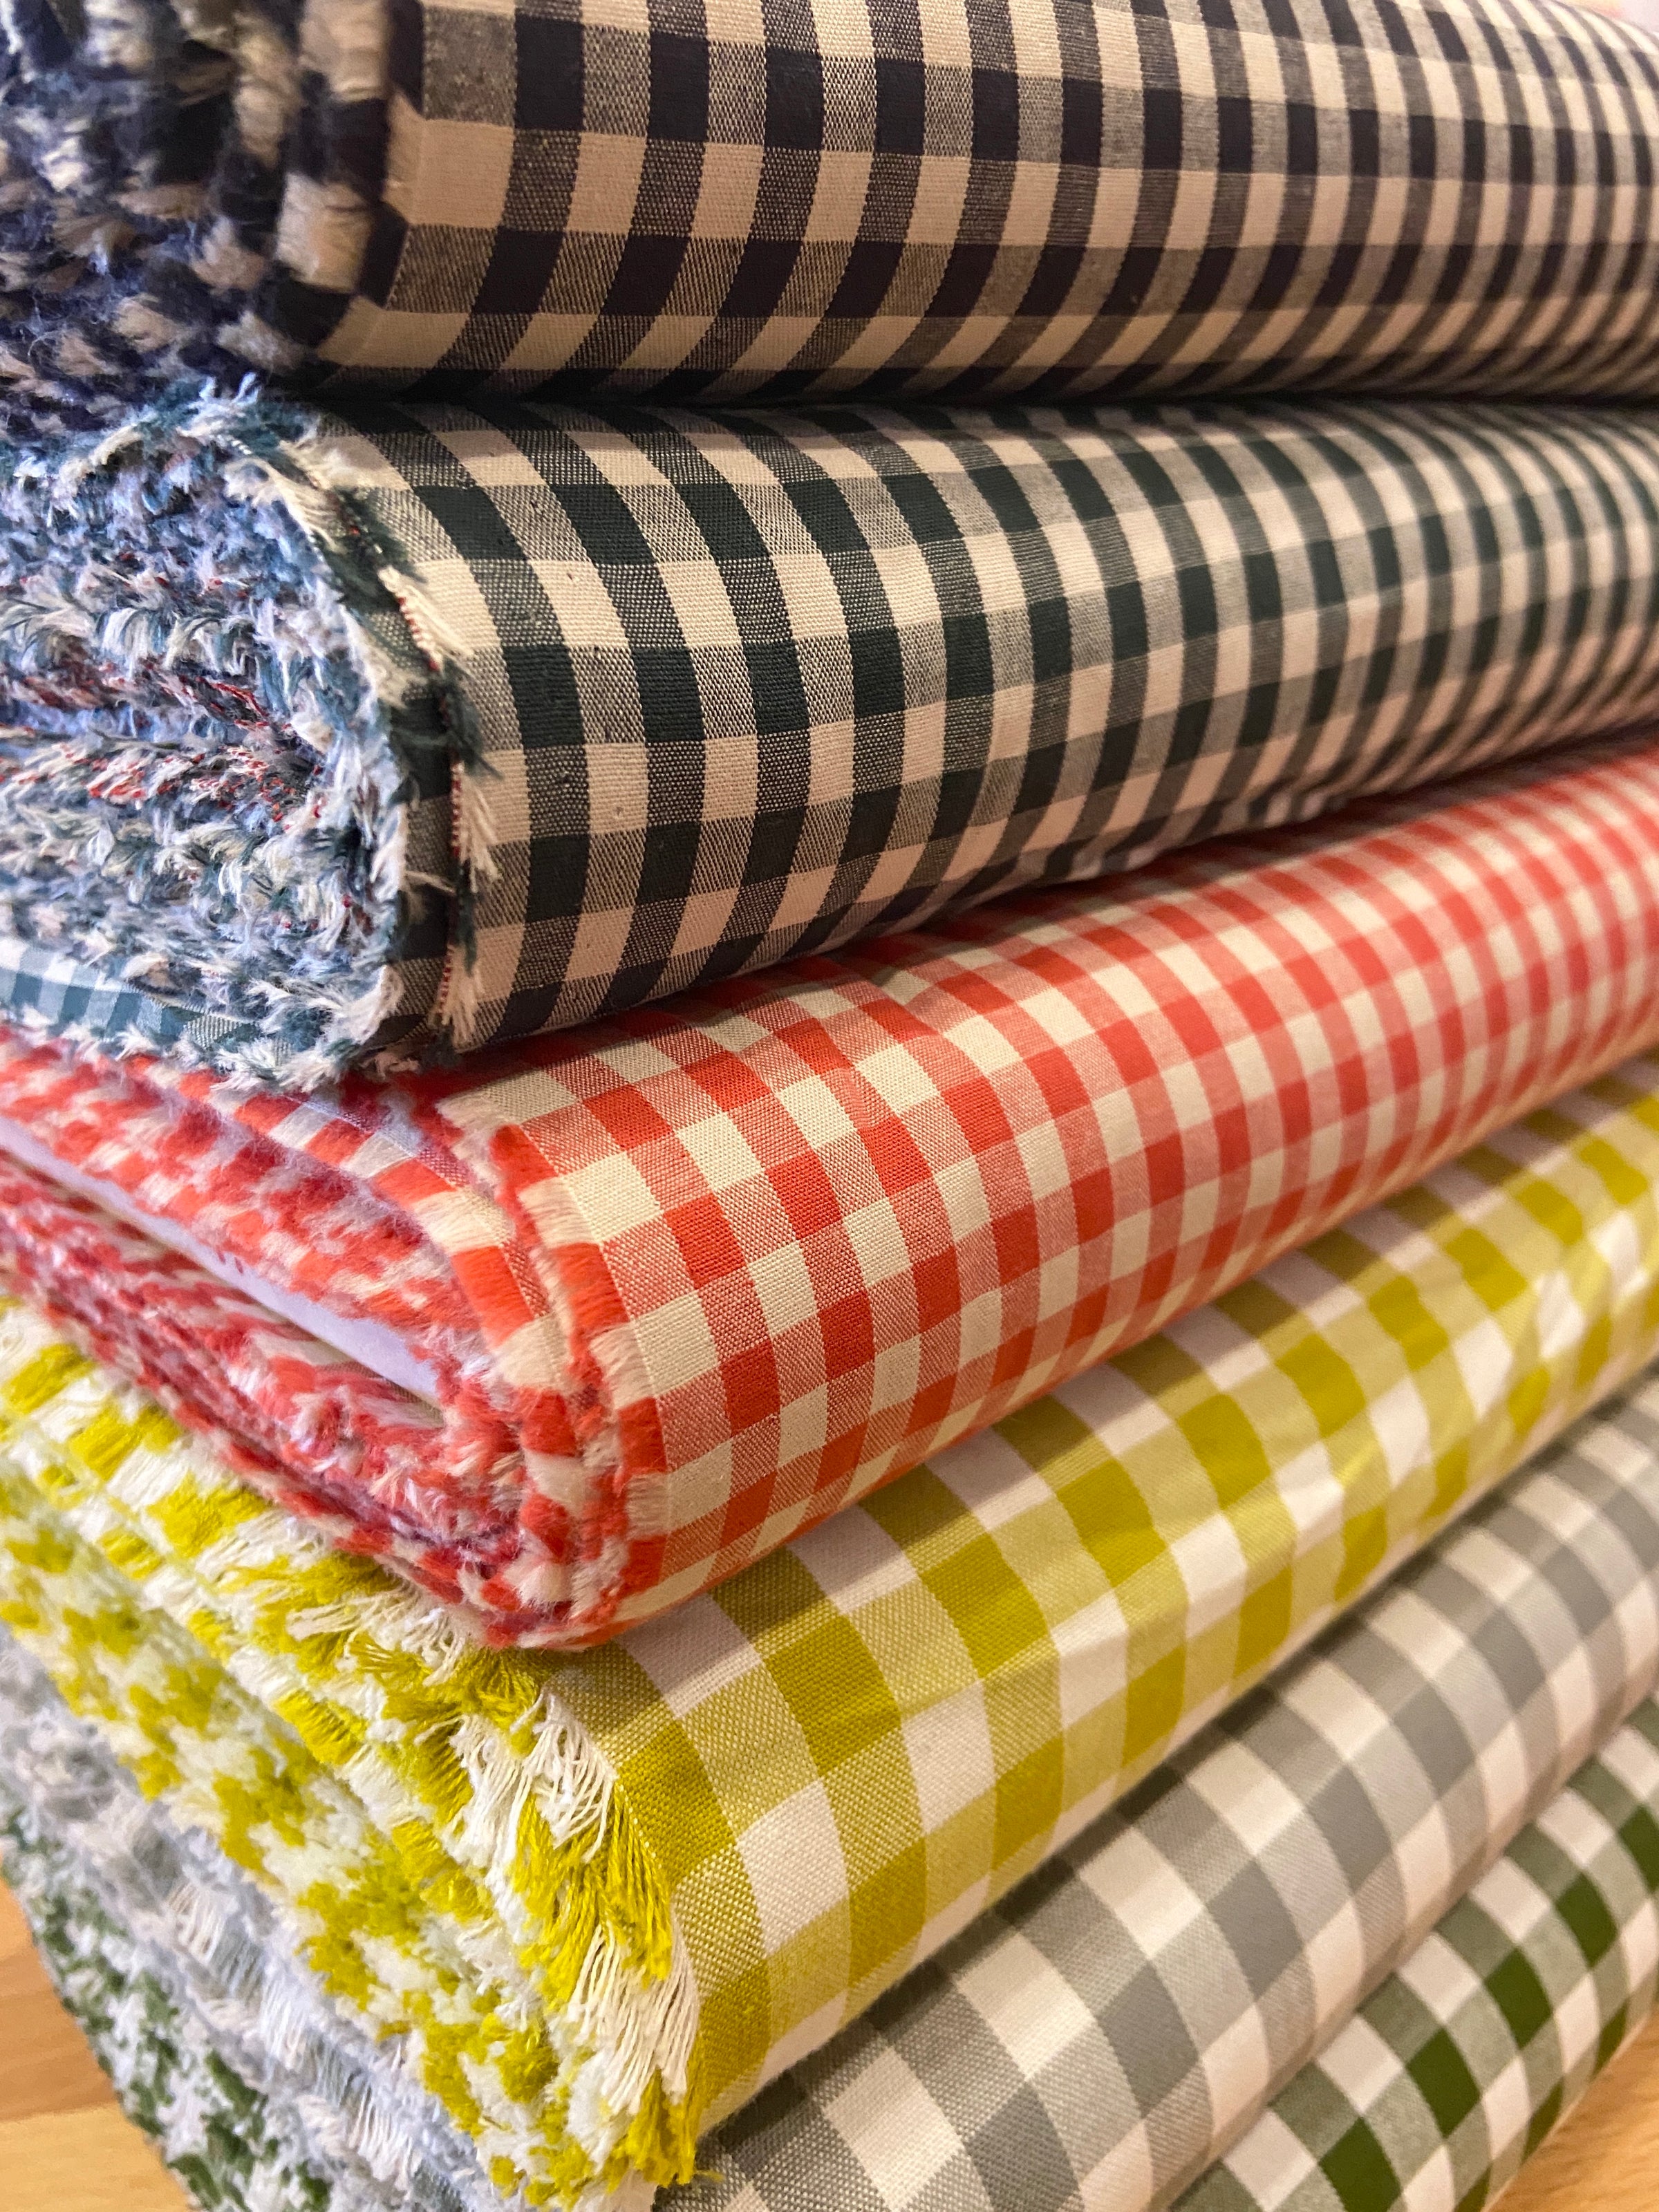 Gingham Fabric - Everything You Need To Know - Bryden Apparel